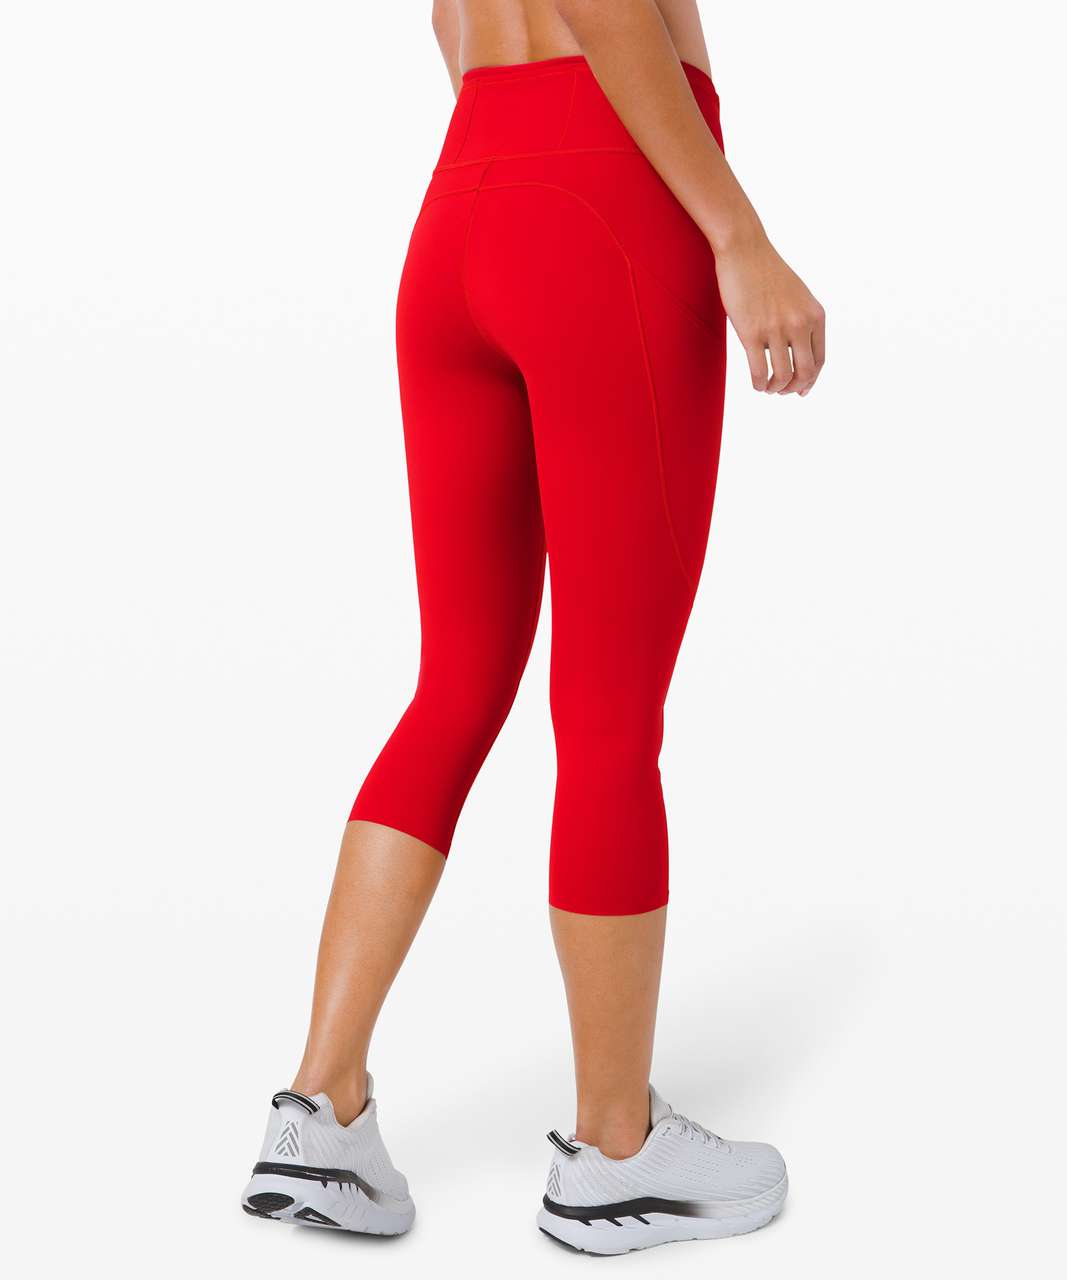 Lululemon Fast and Free Crop II 19 *Non-Reflective - Dark Red